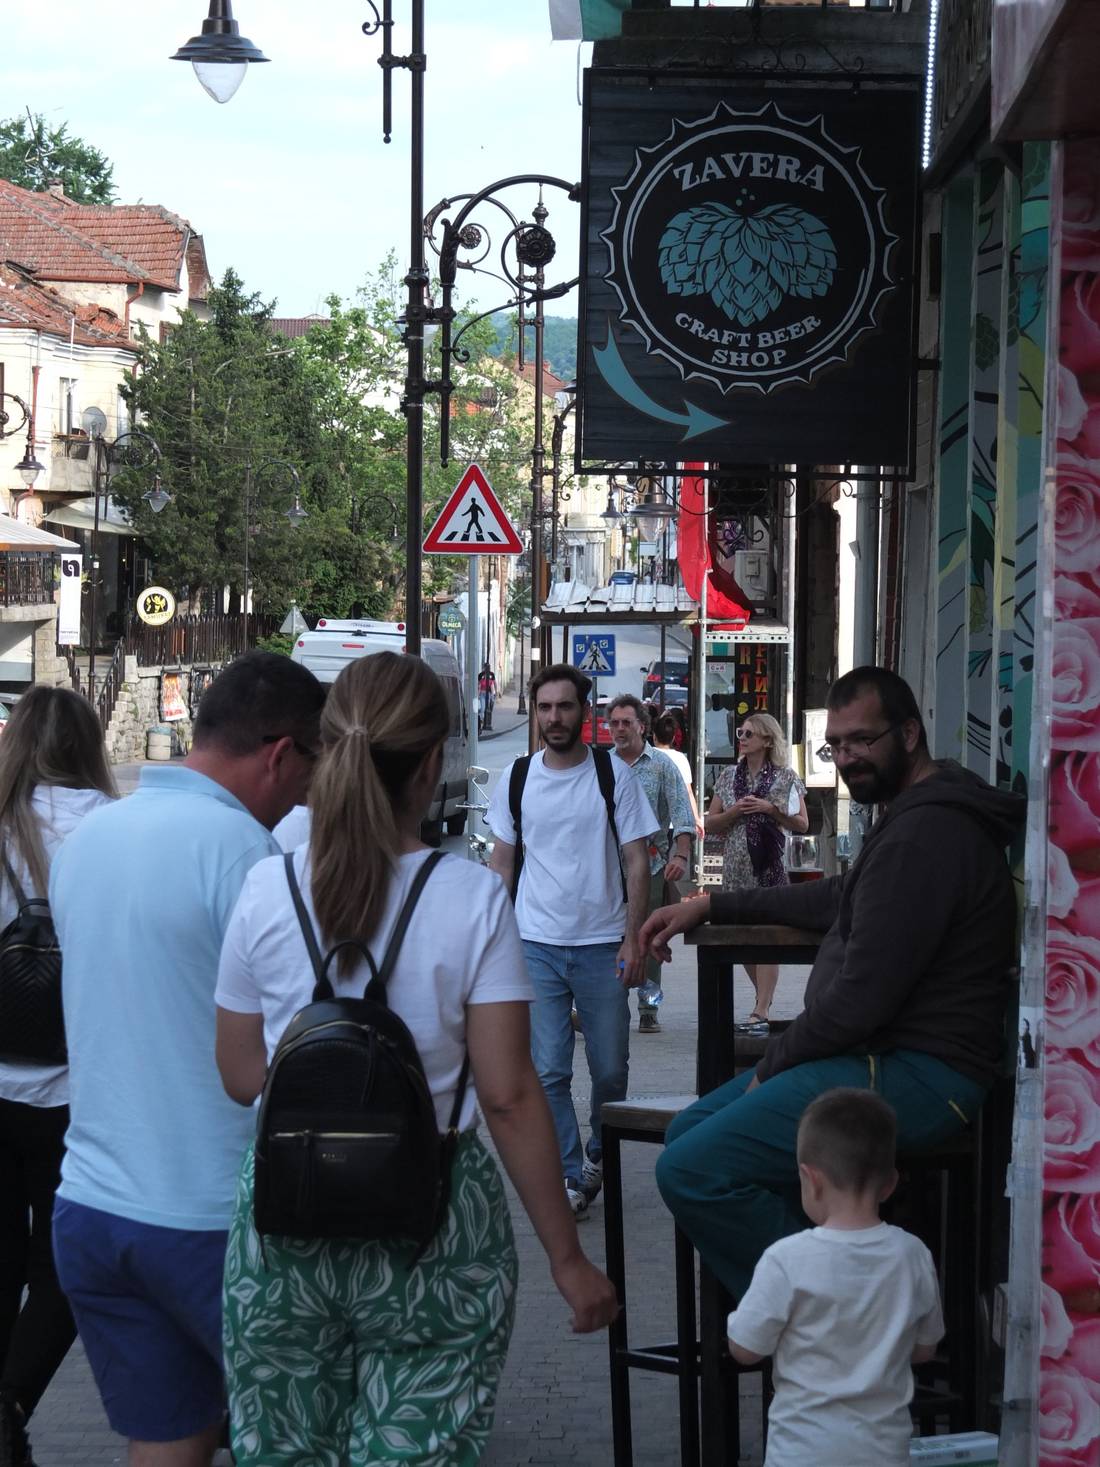 Busy streets of Veliko Tarnovo being monitored by a chilled looking guy enjoying his craft beer.